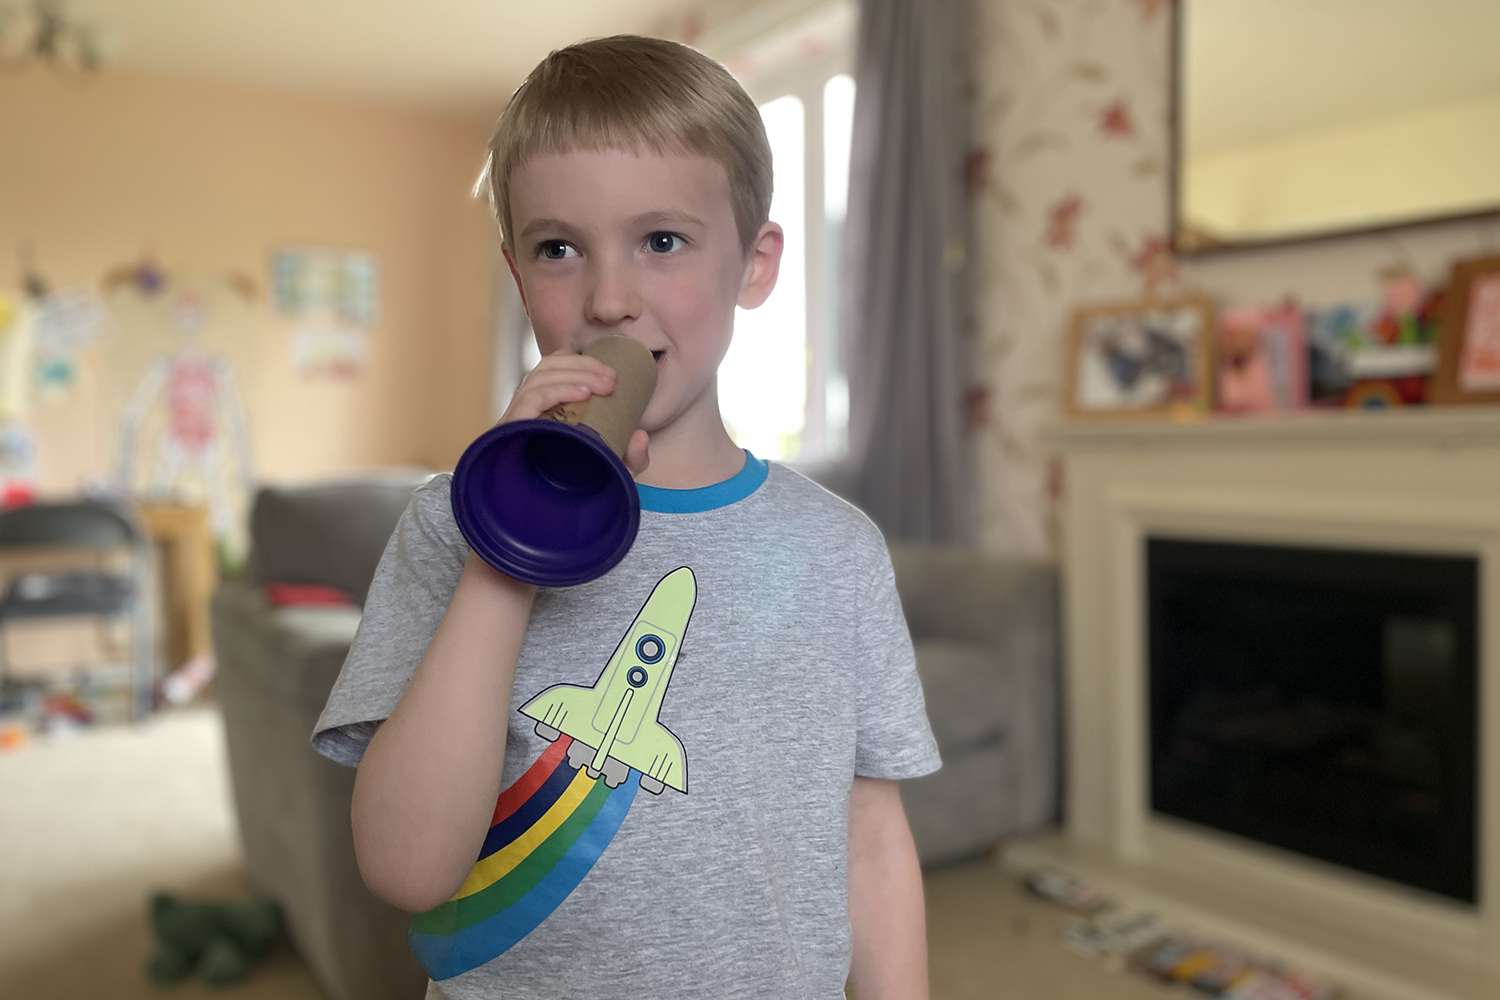 Gabe holding a toilet roll tube megaphone in front of his mouth